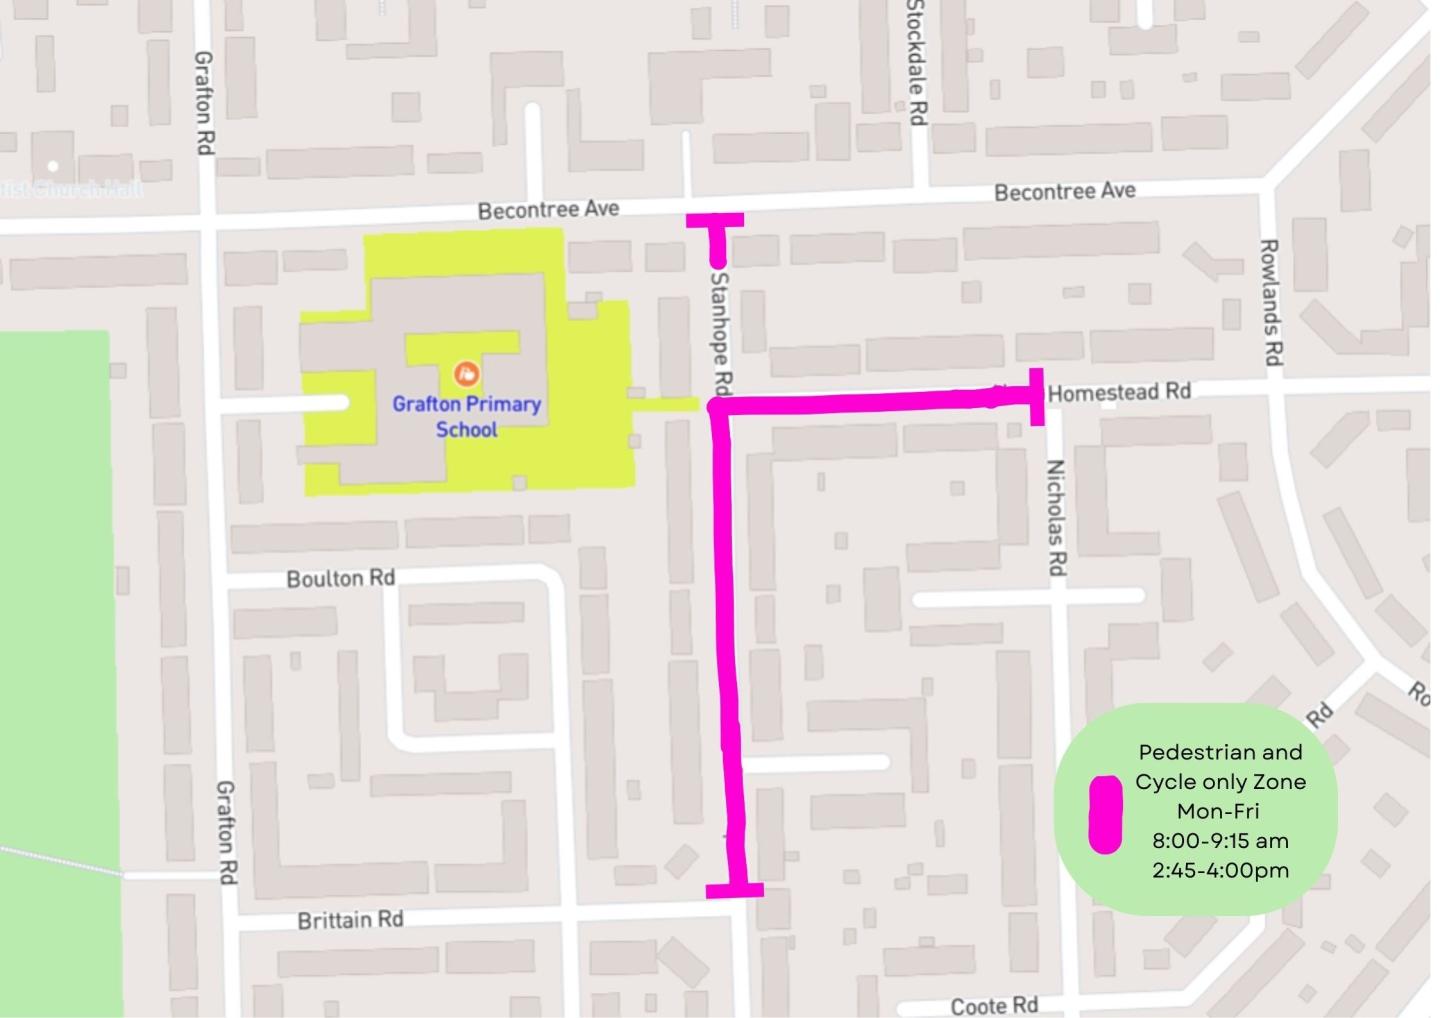 A map showing the location of the School Street for Grafton Primary School